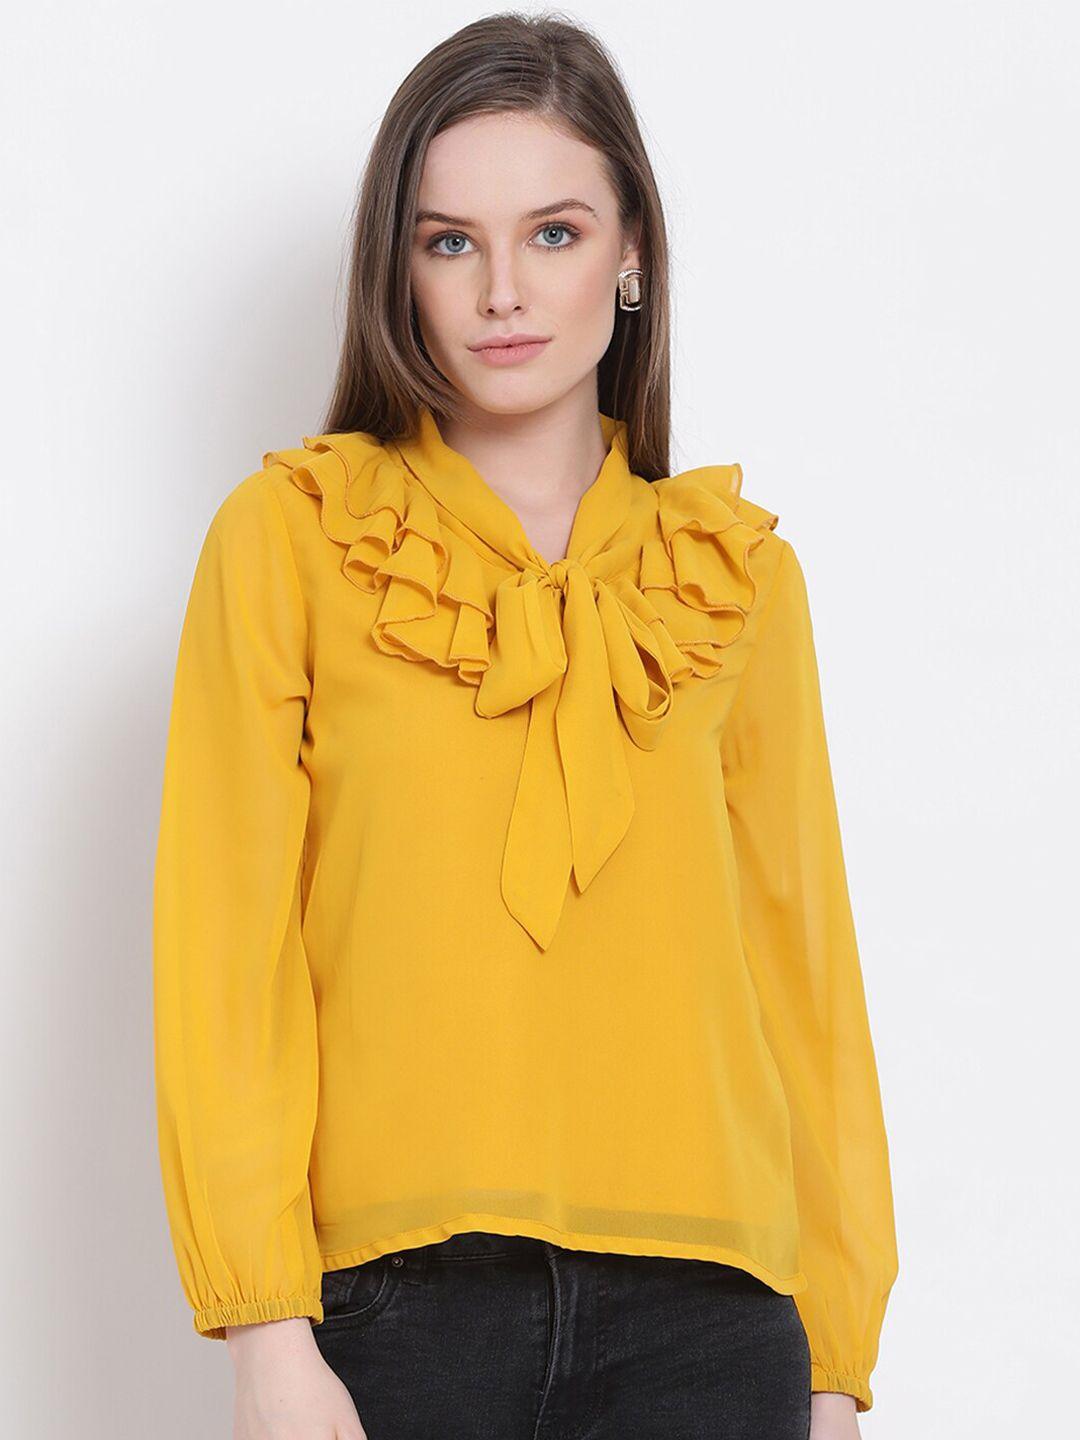 draax-fashions-yellow-tie-up-neck-georgette-regular-top